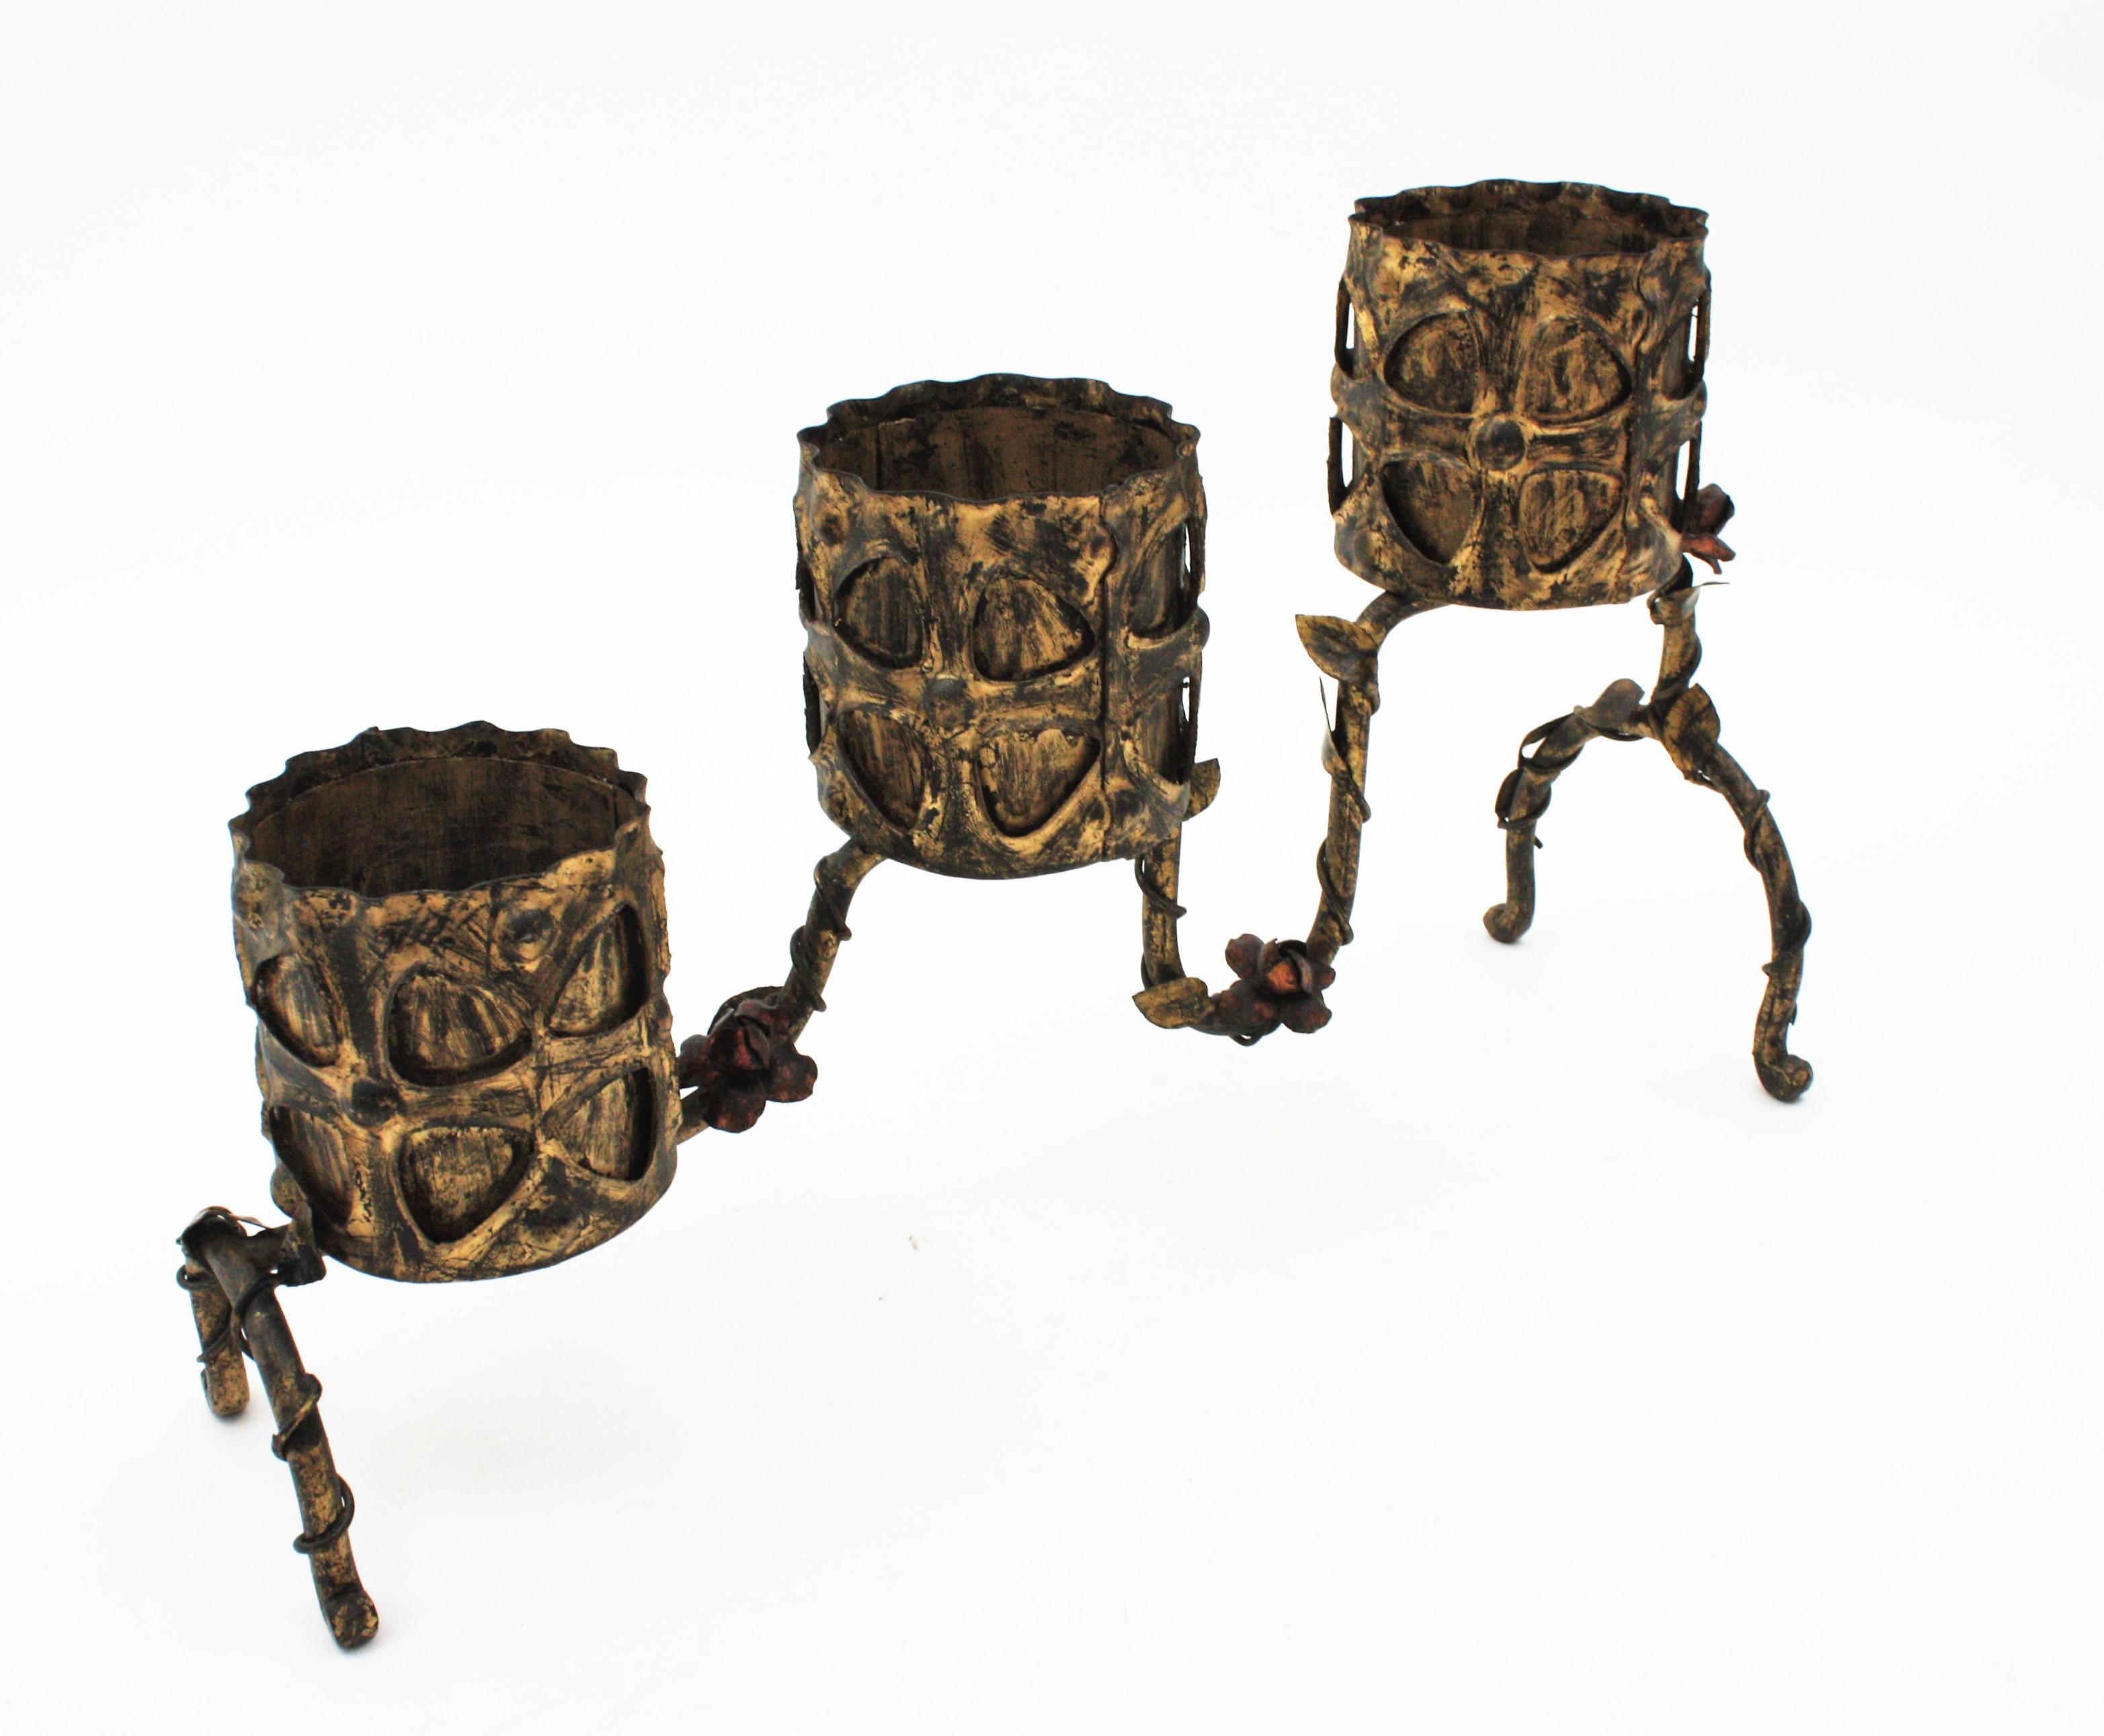 One of a kind Triple floor standing planter, gold leaf, gilt Iron. Spain, 1950s
A beautiful hand-hammered gilt iron pedestal plant stand for three pots. Entirely made by hand. Richly decorated with leaves, roses and gold leaf gilt finishing.